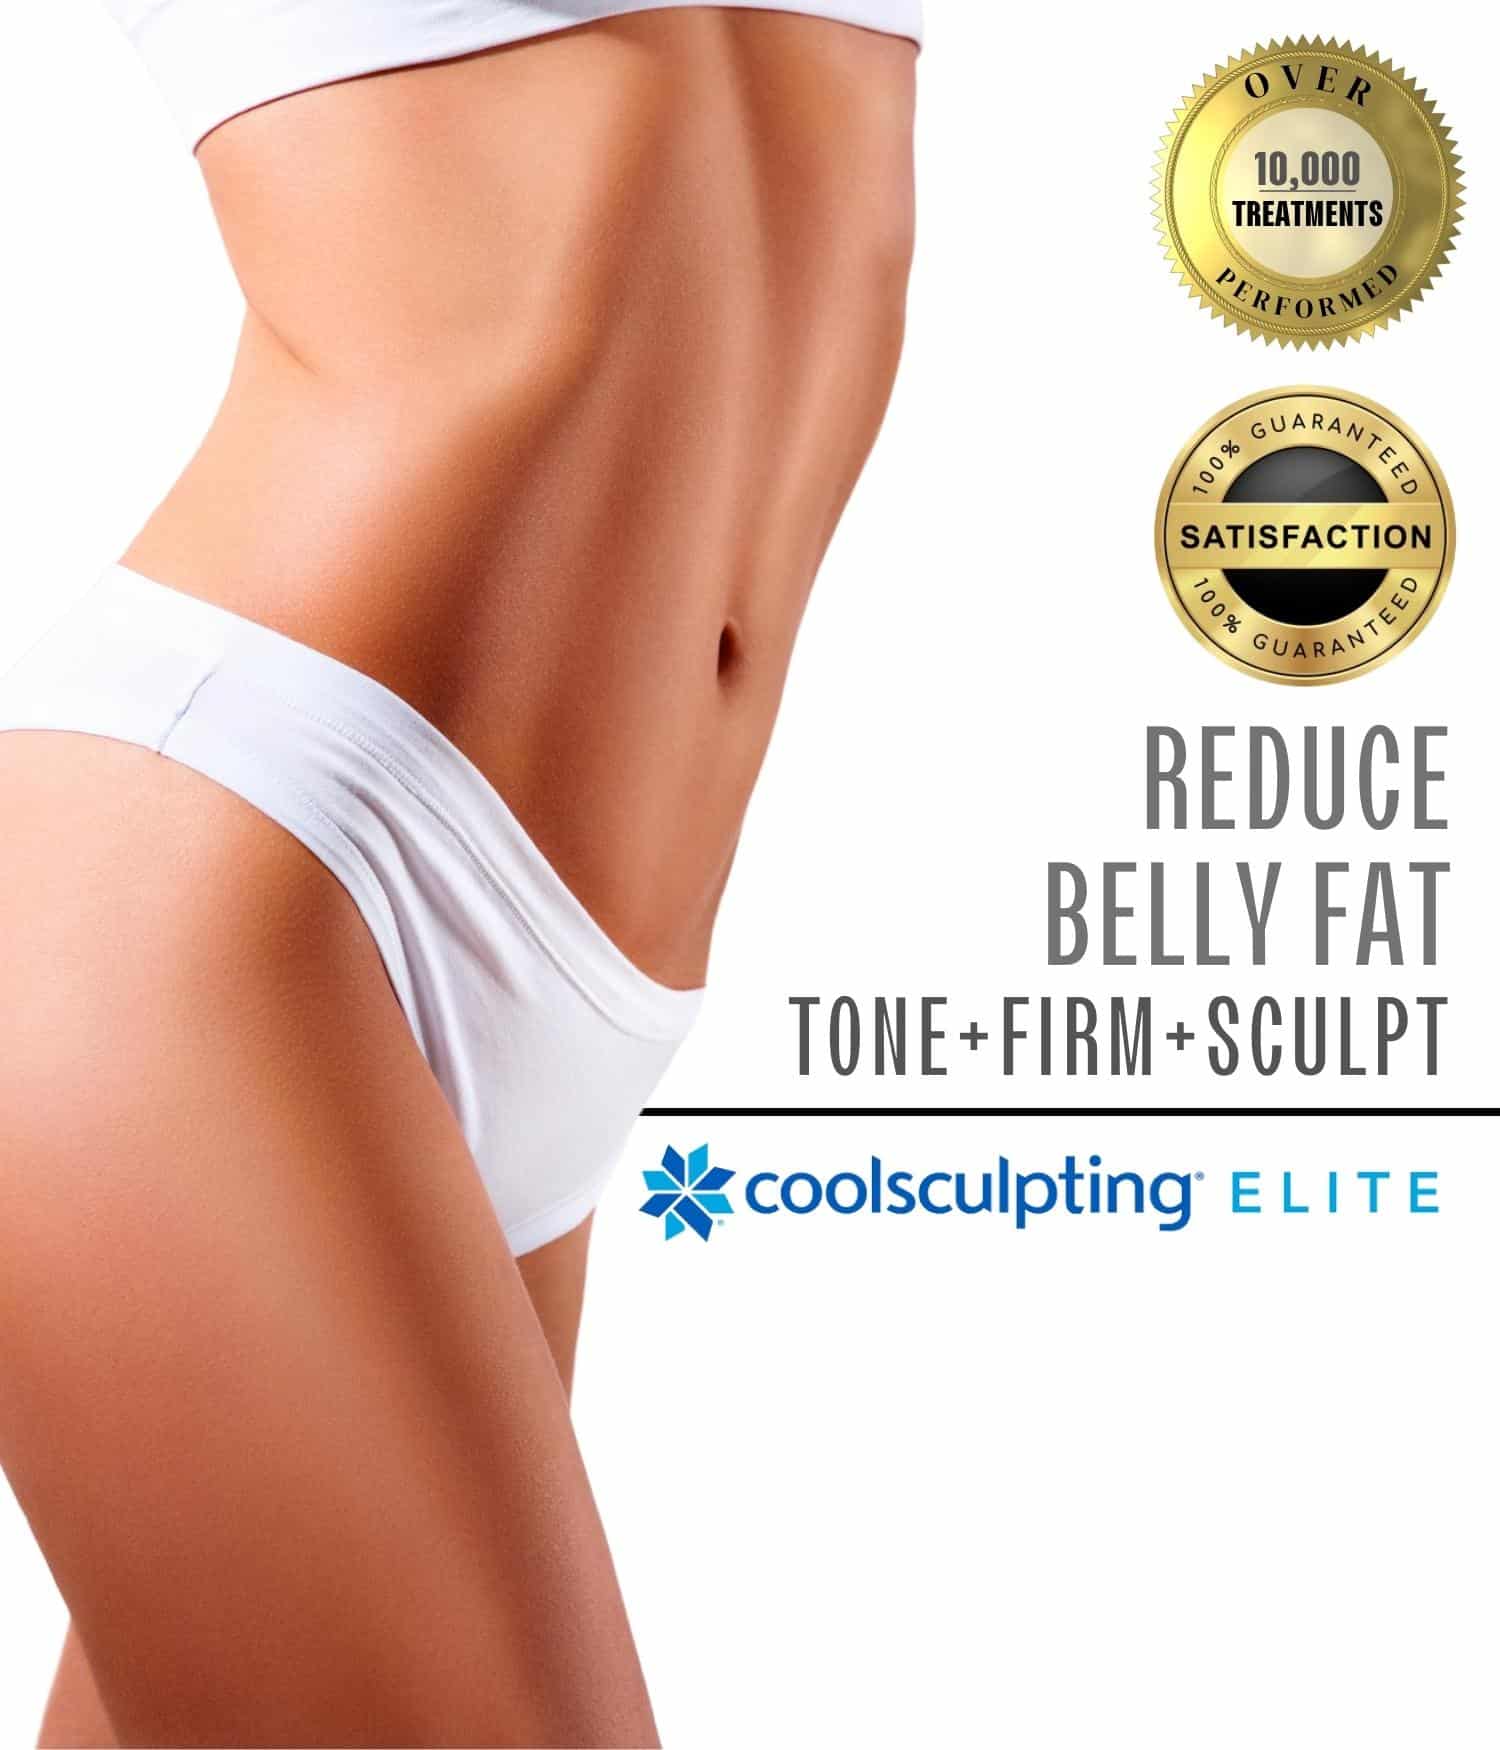 Fitness woman with a flat abdomen promoting CoolSculpting Elite treatment-a service offered at Admire Aesthetics